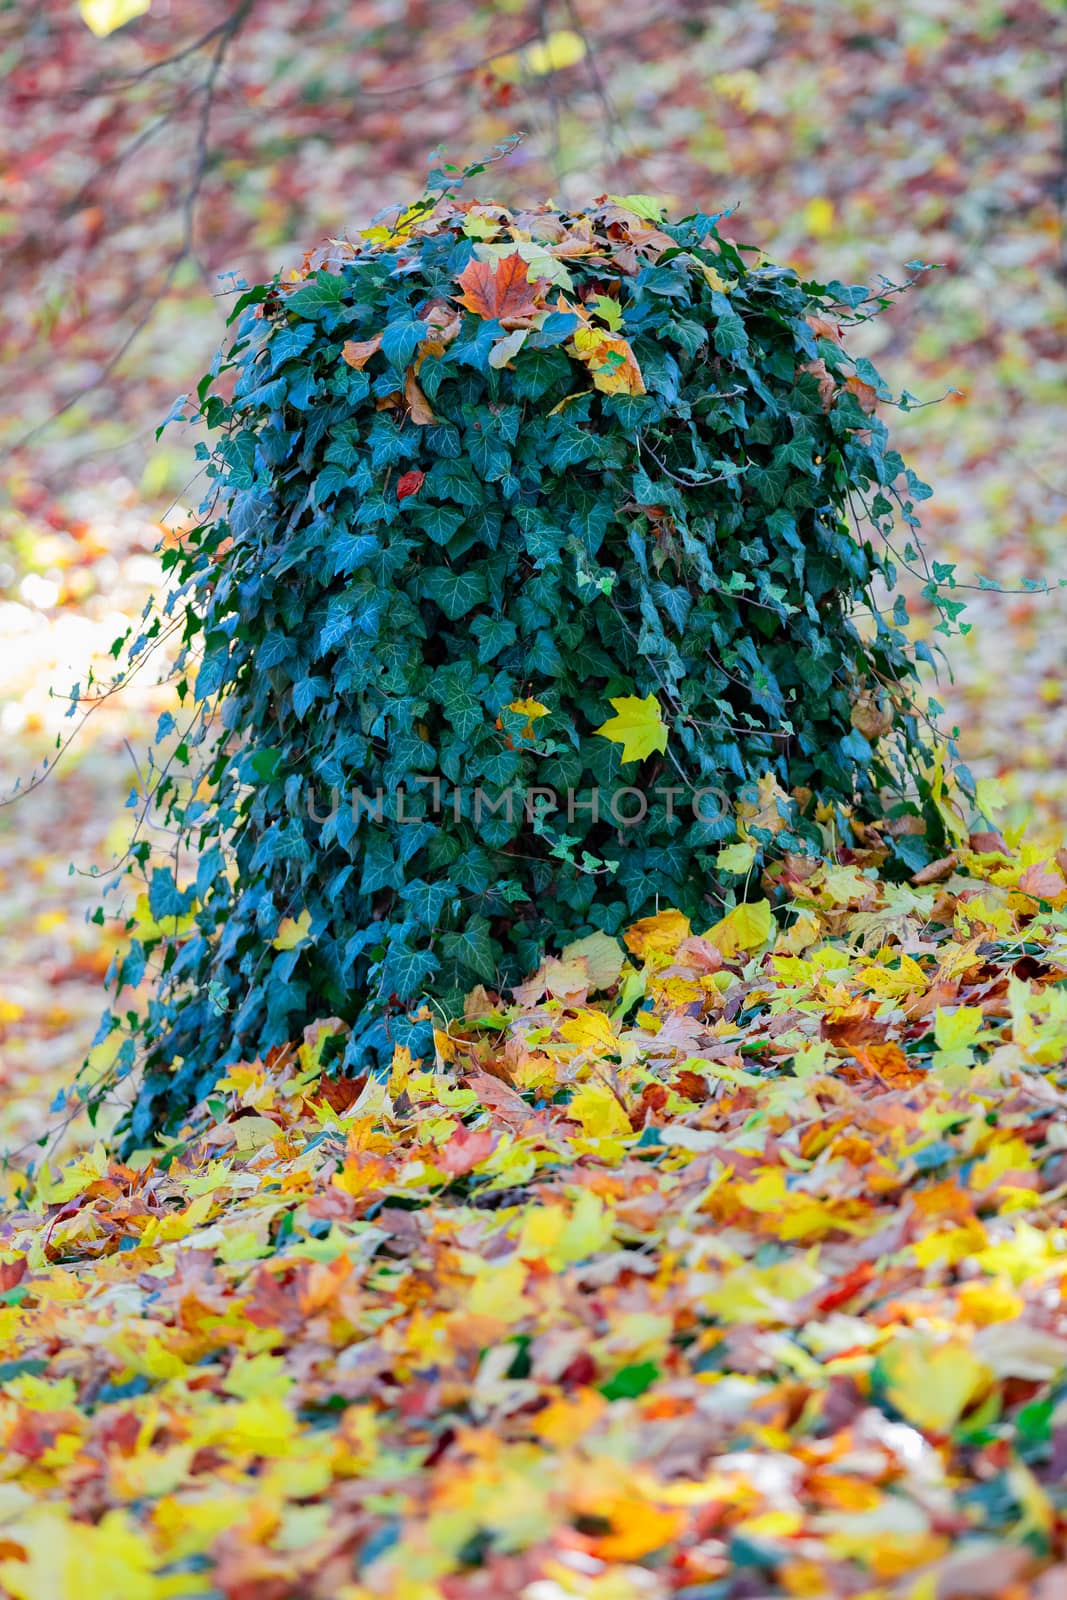 fallen leaves on the ground in the park in autumn for background or texture use. Natural fall concept, autumn pattern background. ivy plant on stump